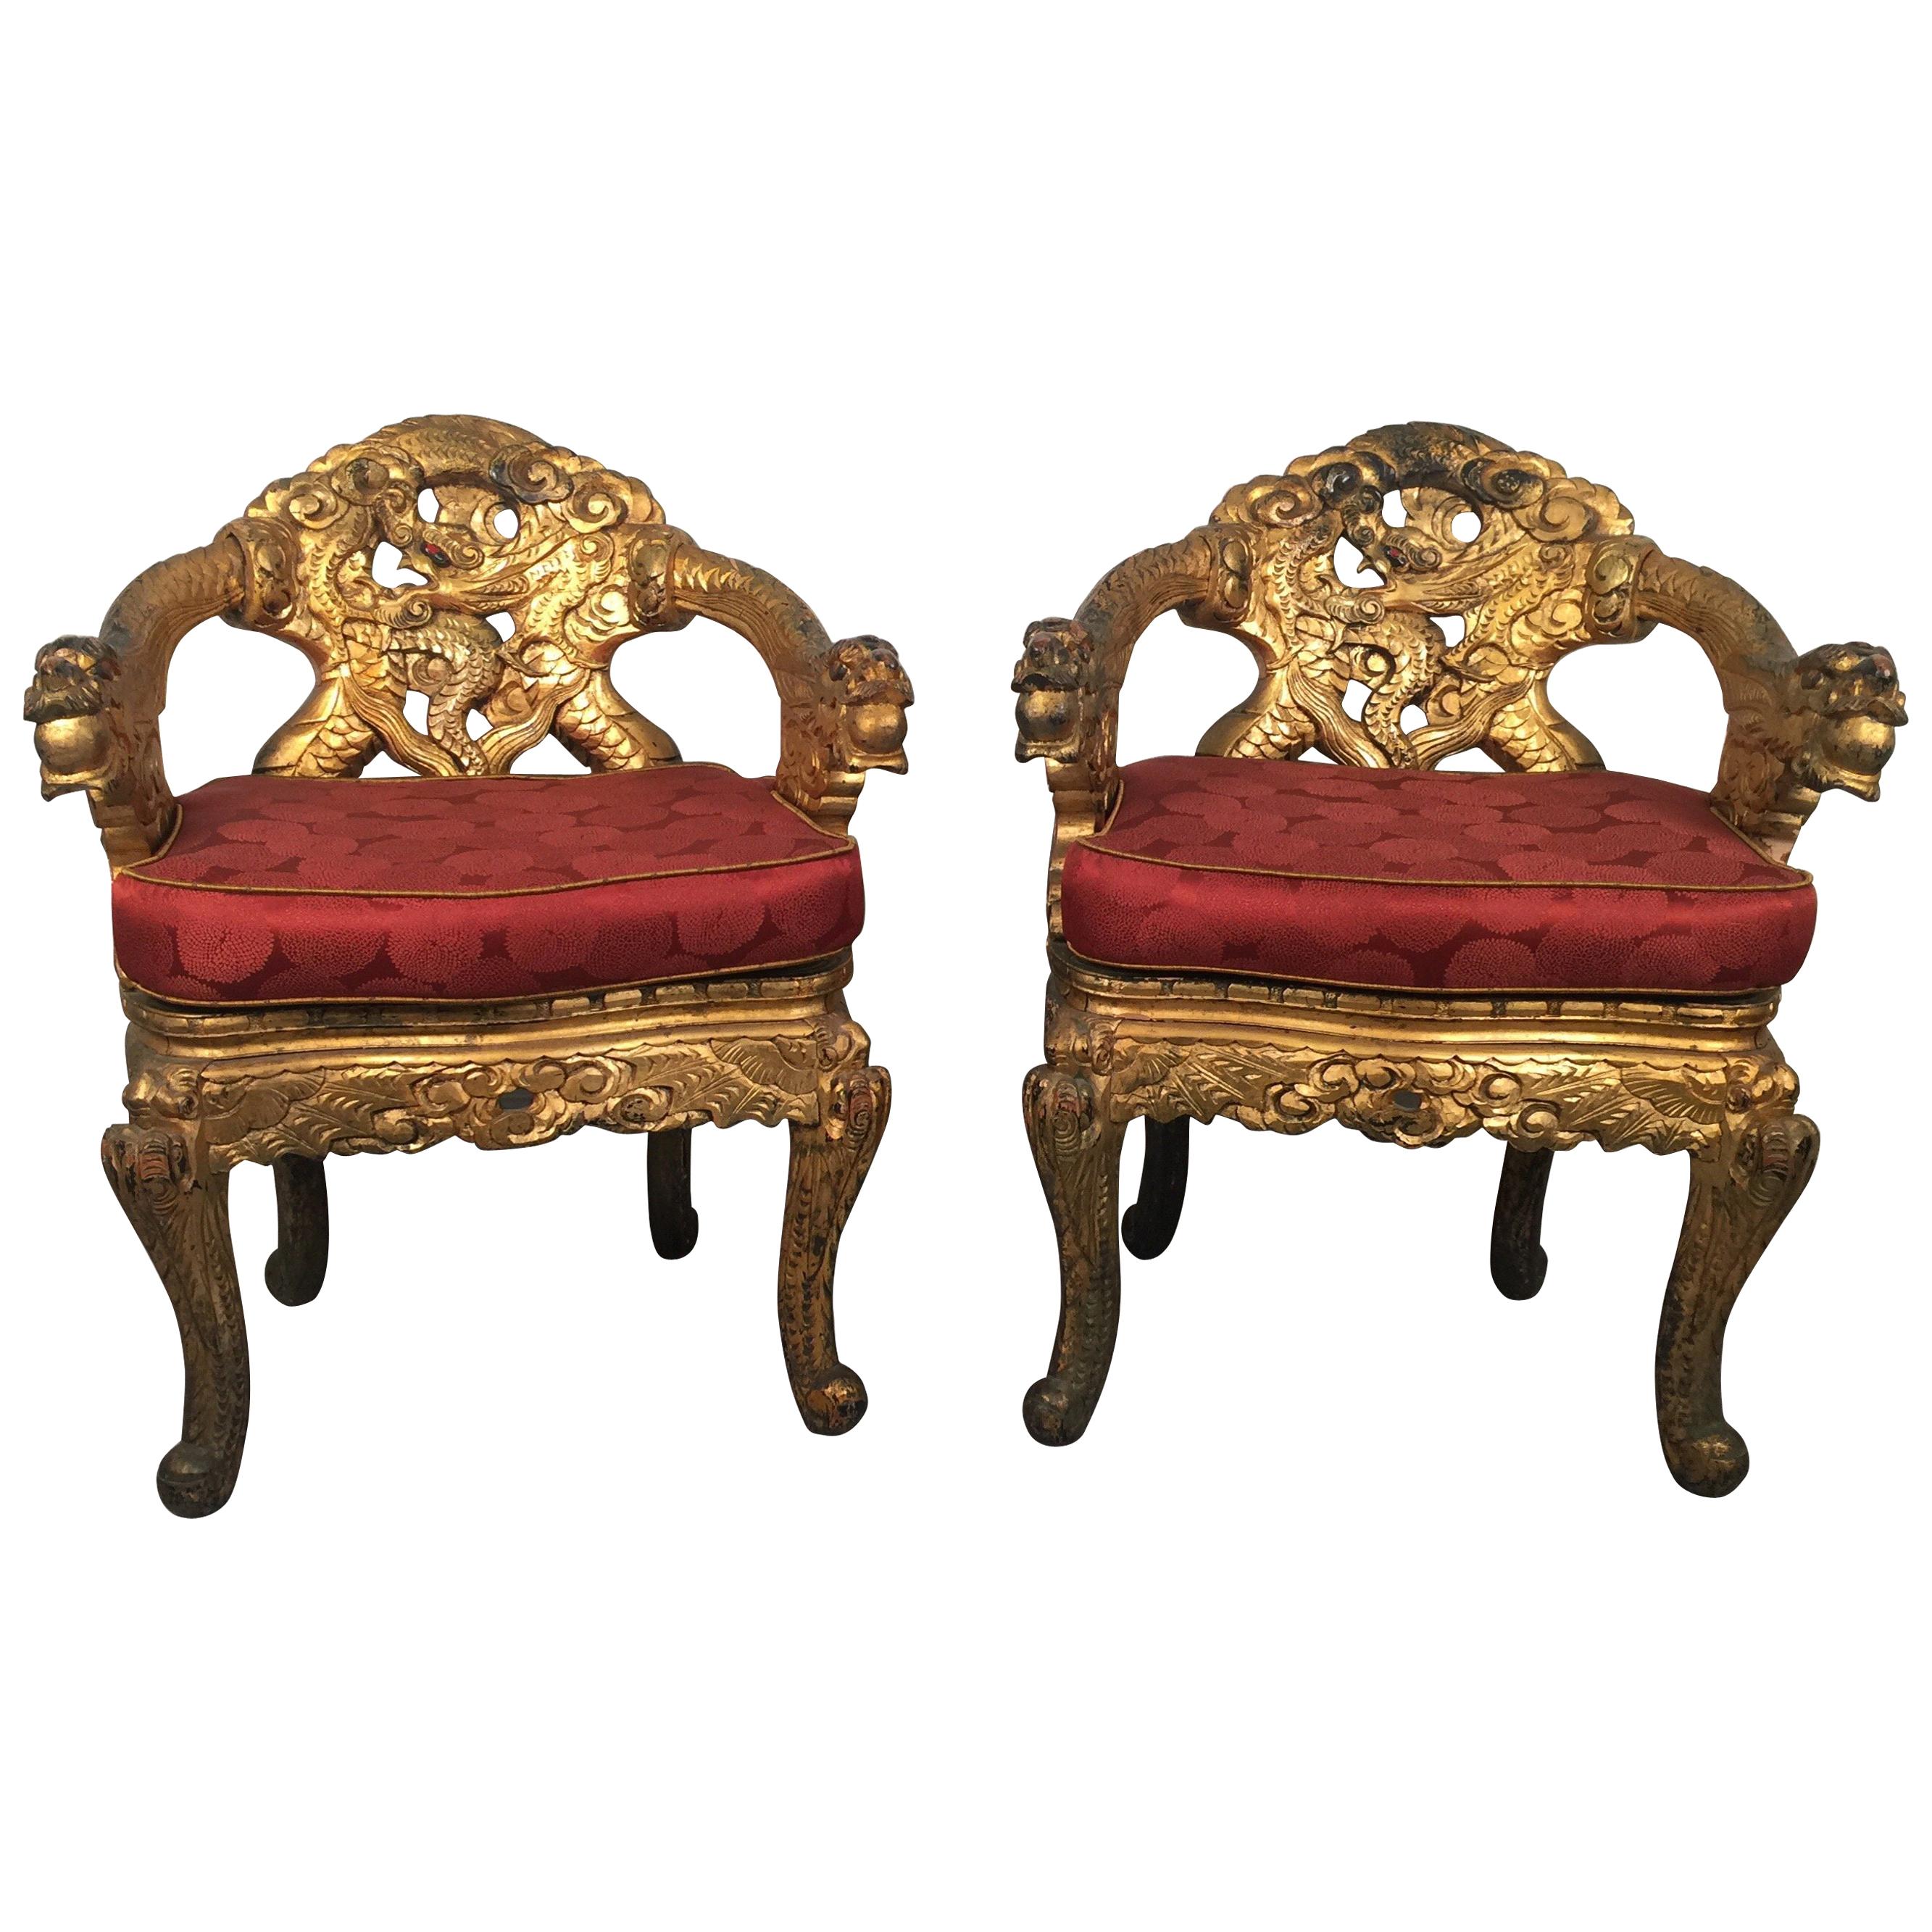 Pair of Hand Carved Gilt Japanese Chairs with Silk Cushions